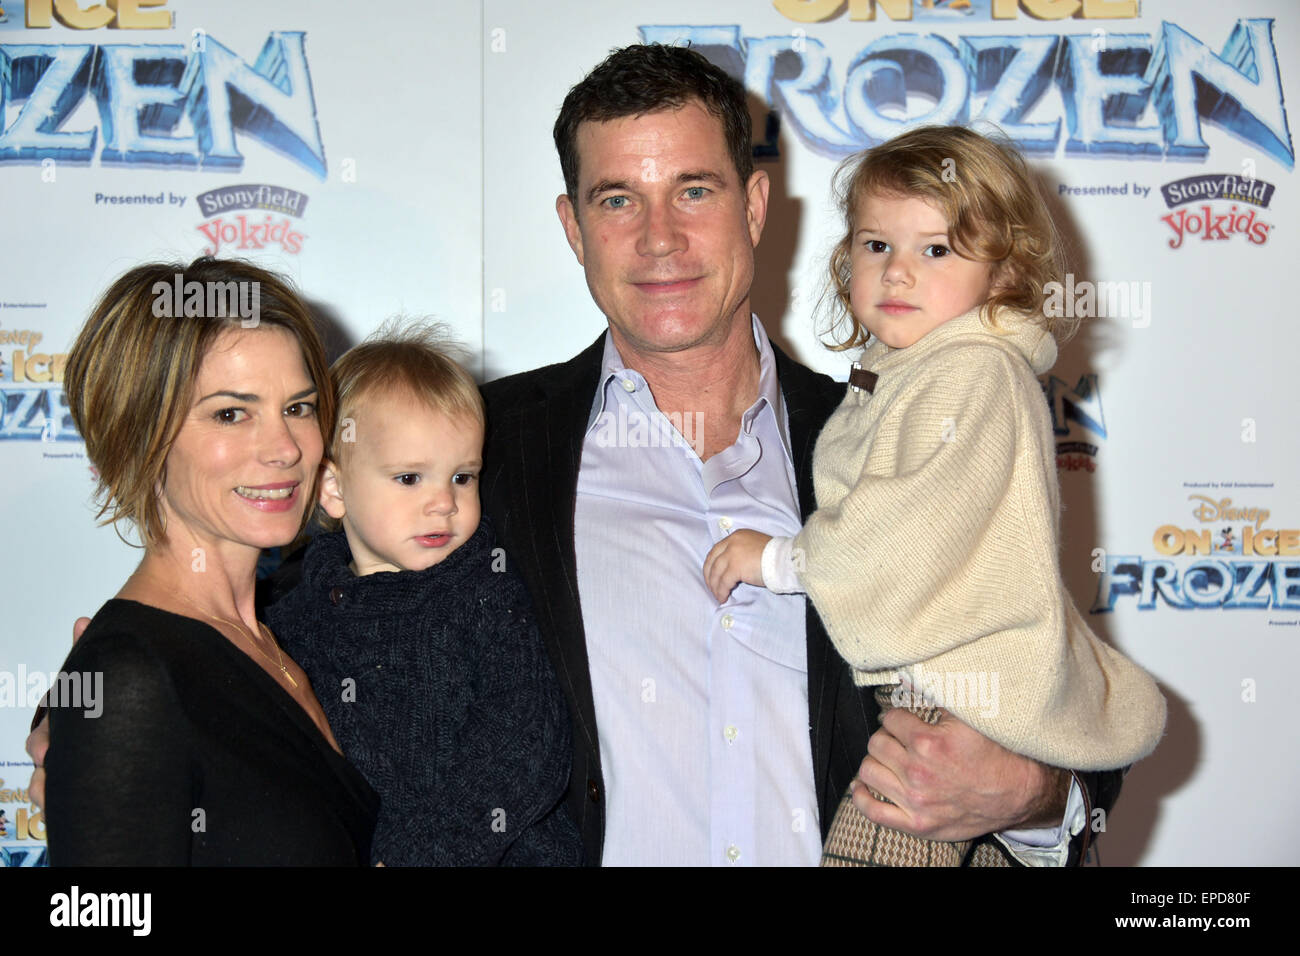 Disney On Ice presents 'Frozen' at The Barclay's Center in Brooklyn - Arrivals  Featuring: Dylan Walsh and Family Where: New York City, New York, United States When: 11 Nov 2014 Credit: Rob Rich/WENN.com Stock Photo